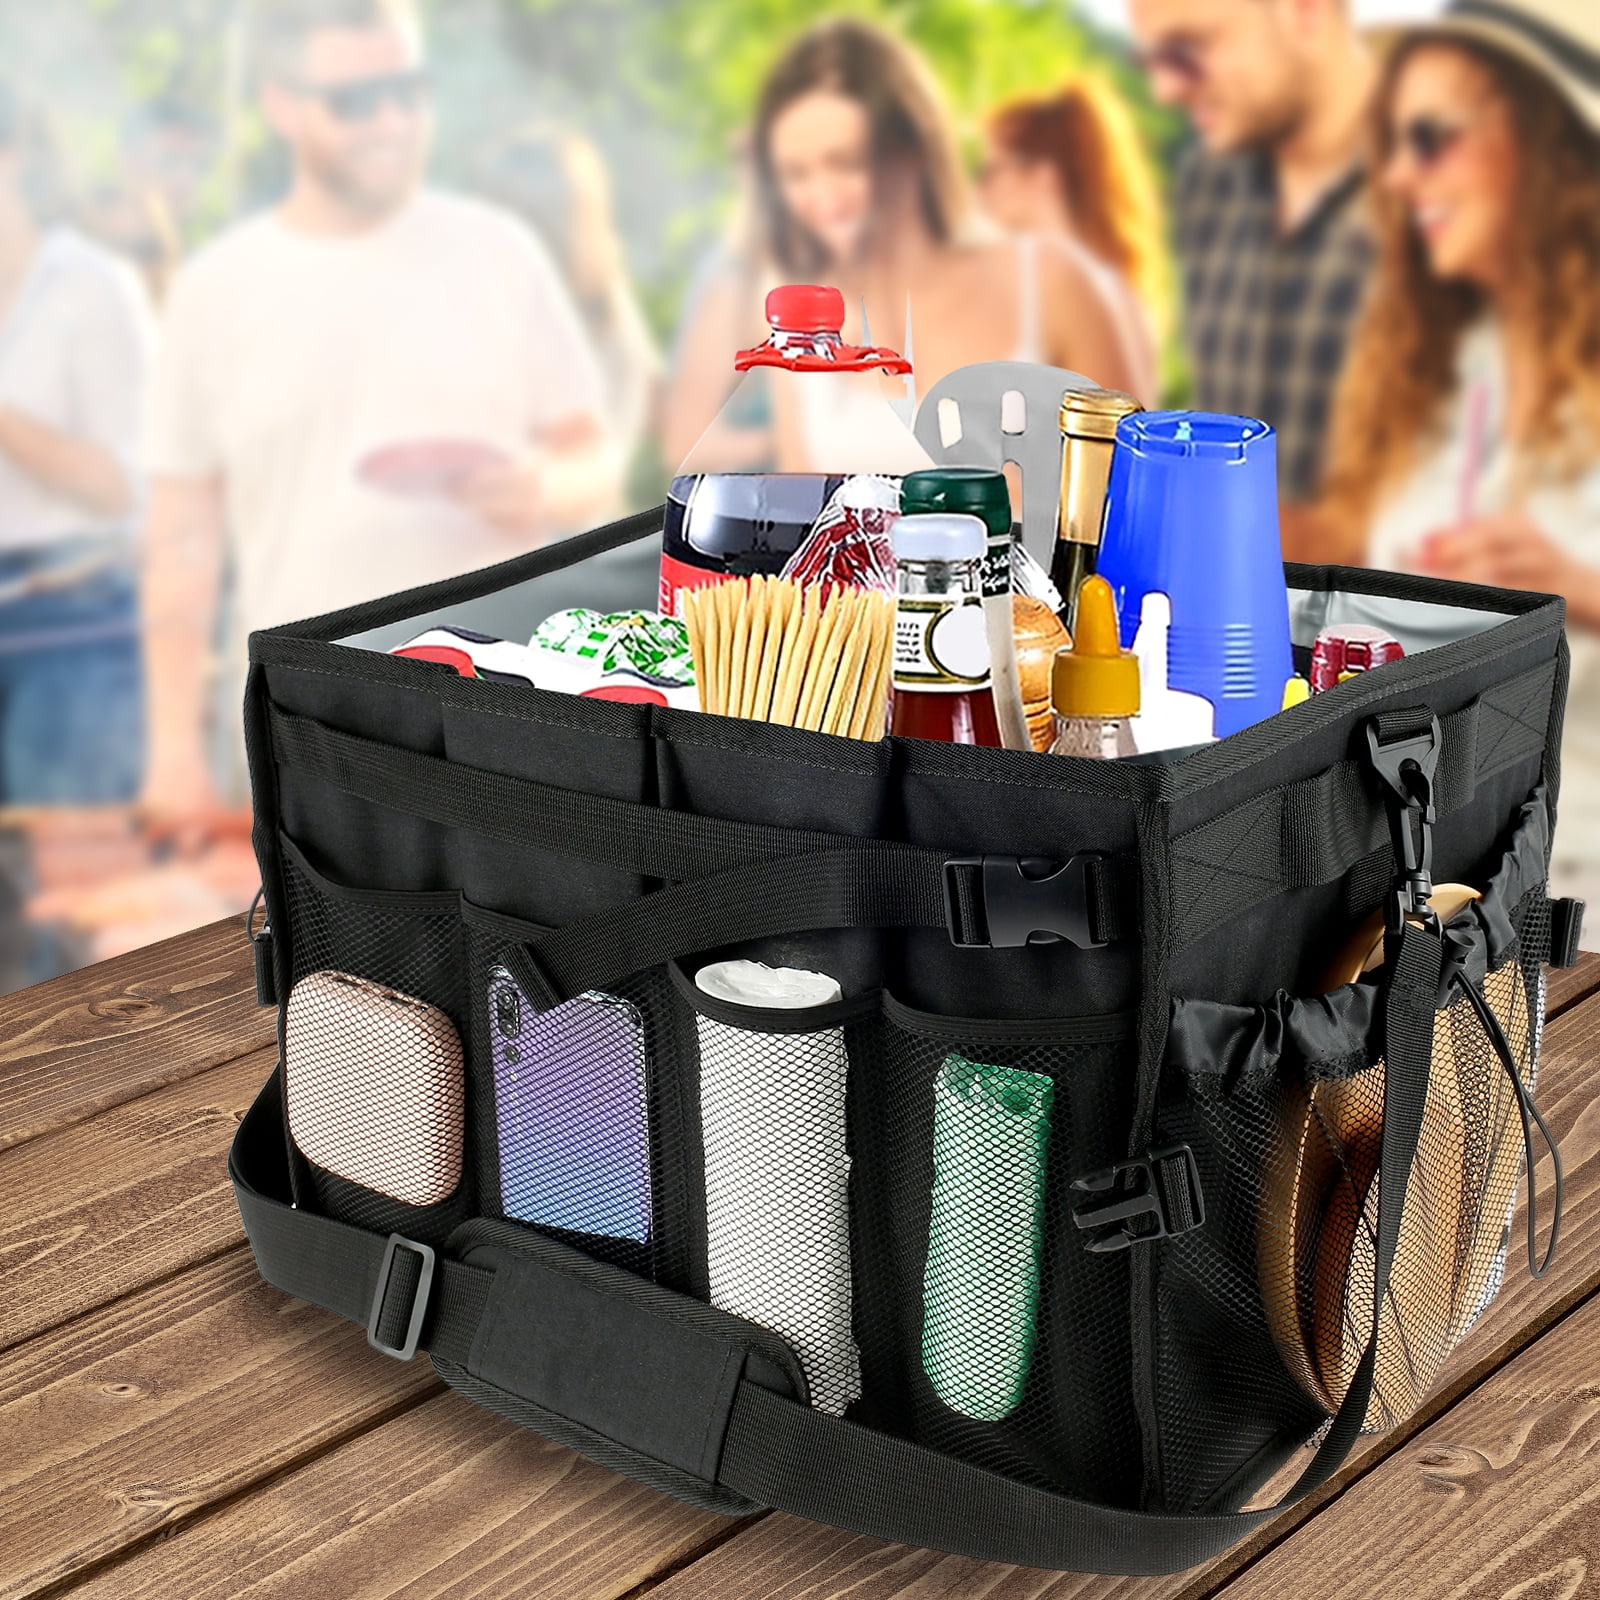 Heavy Duty Steel Organizing Paper Towels, Condiments, Tools For Grill, Bbq, Picnics, Garage, Cars,and Household Cleaning Caddy, Large, Black